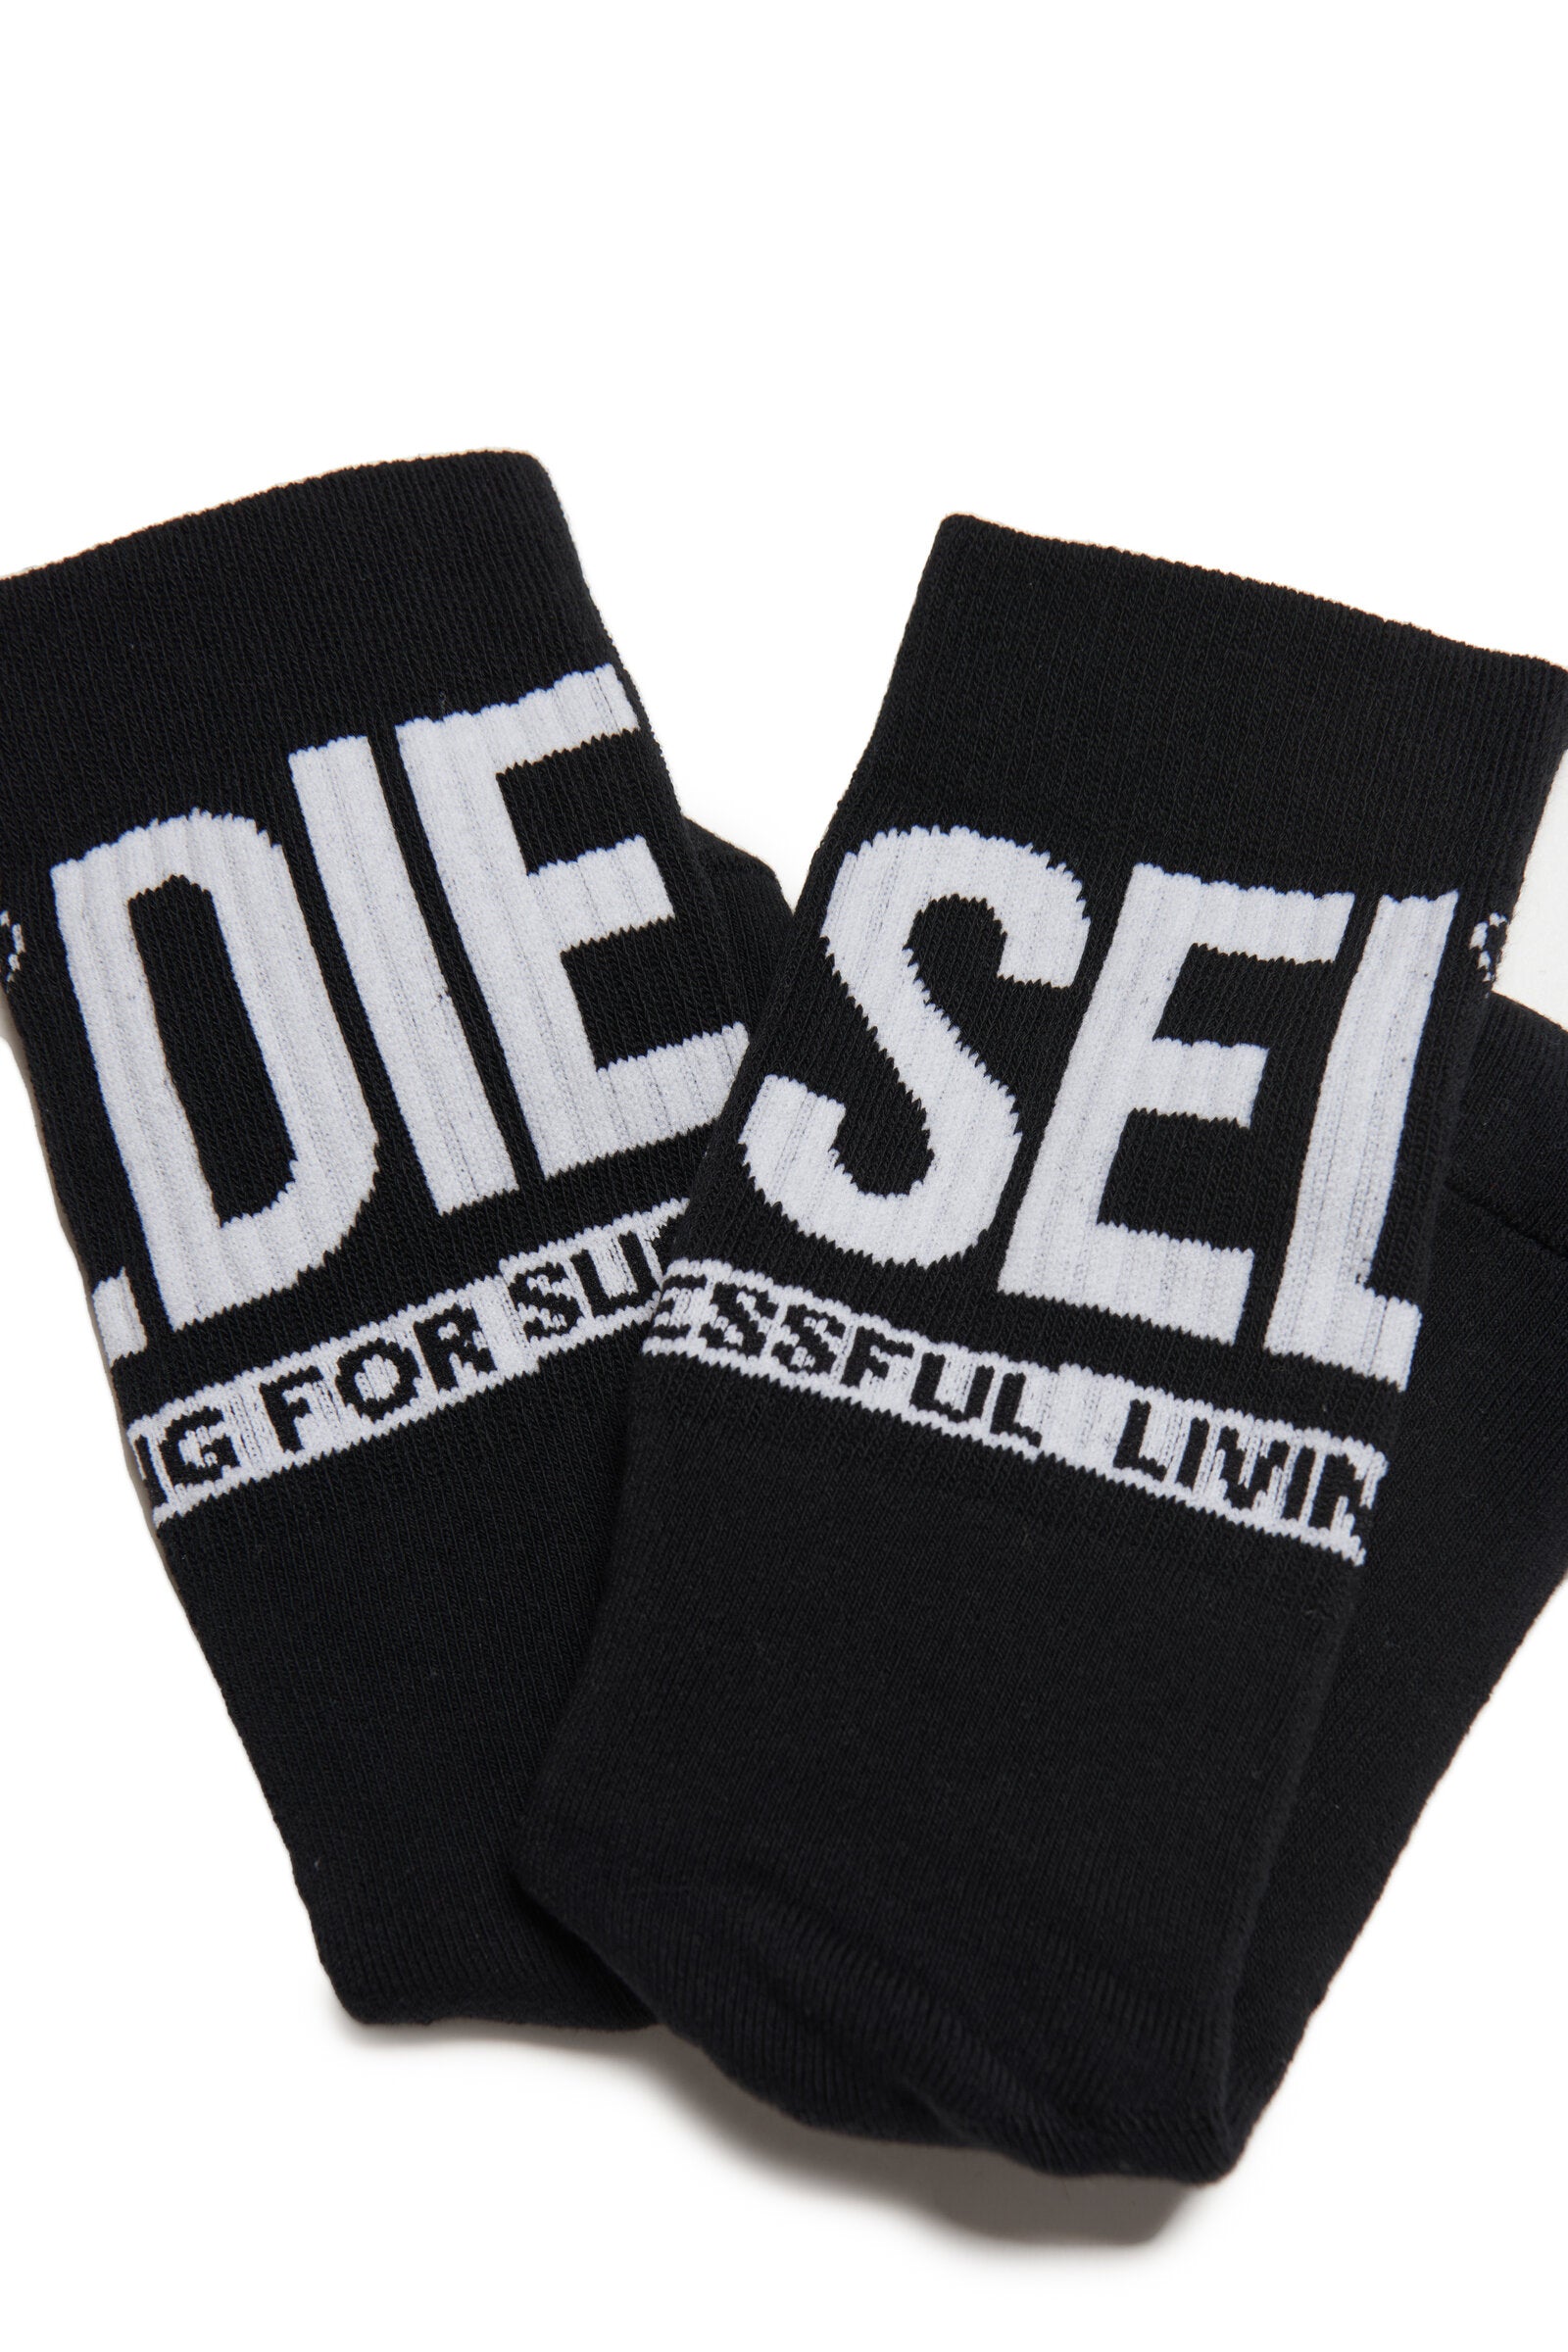 Set of two pairs of black and white logo socks